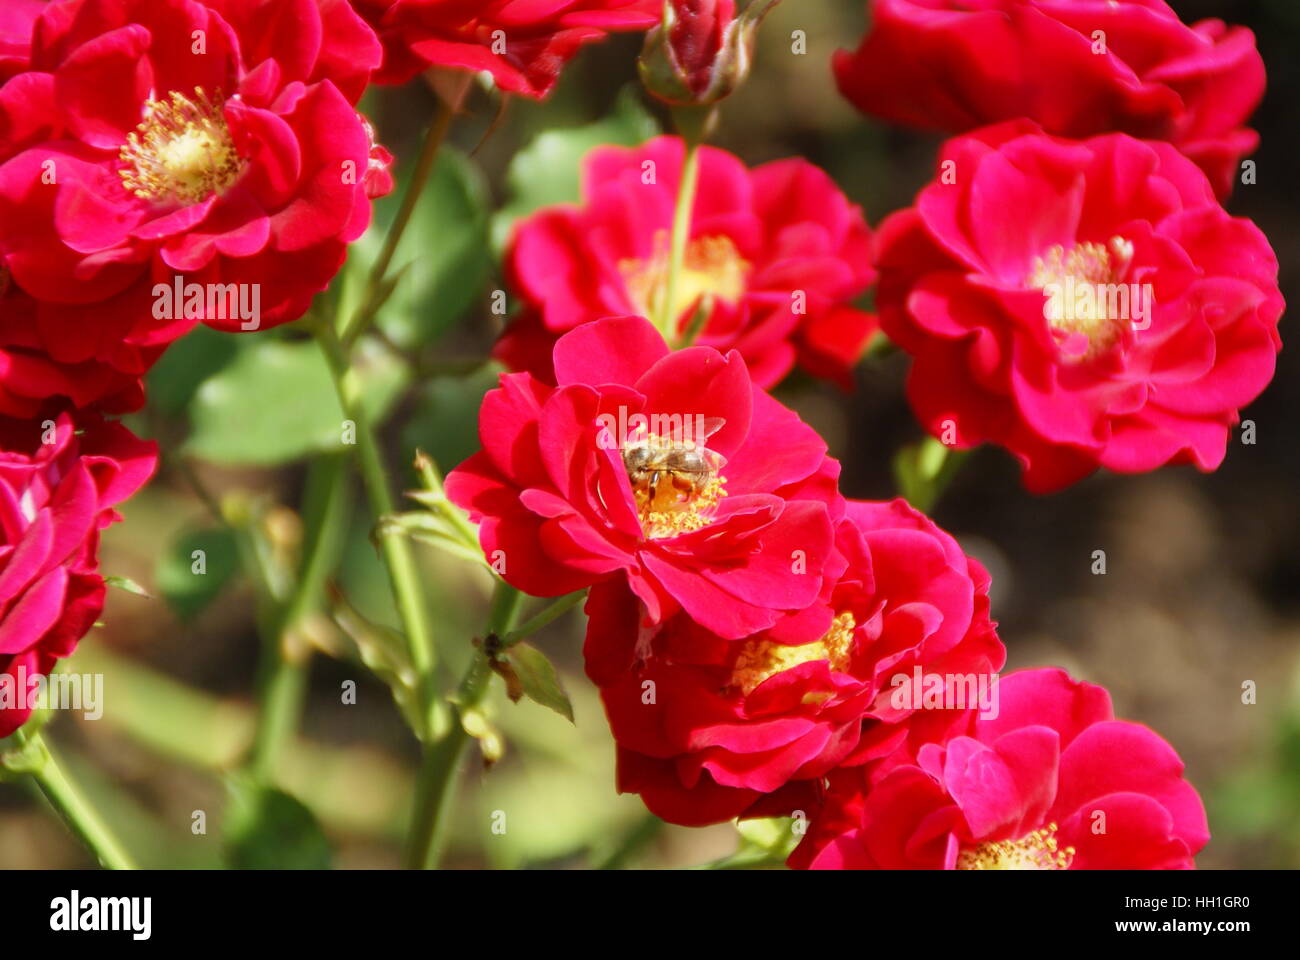 A bee in a red rose. Stock Photo